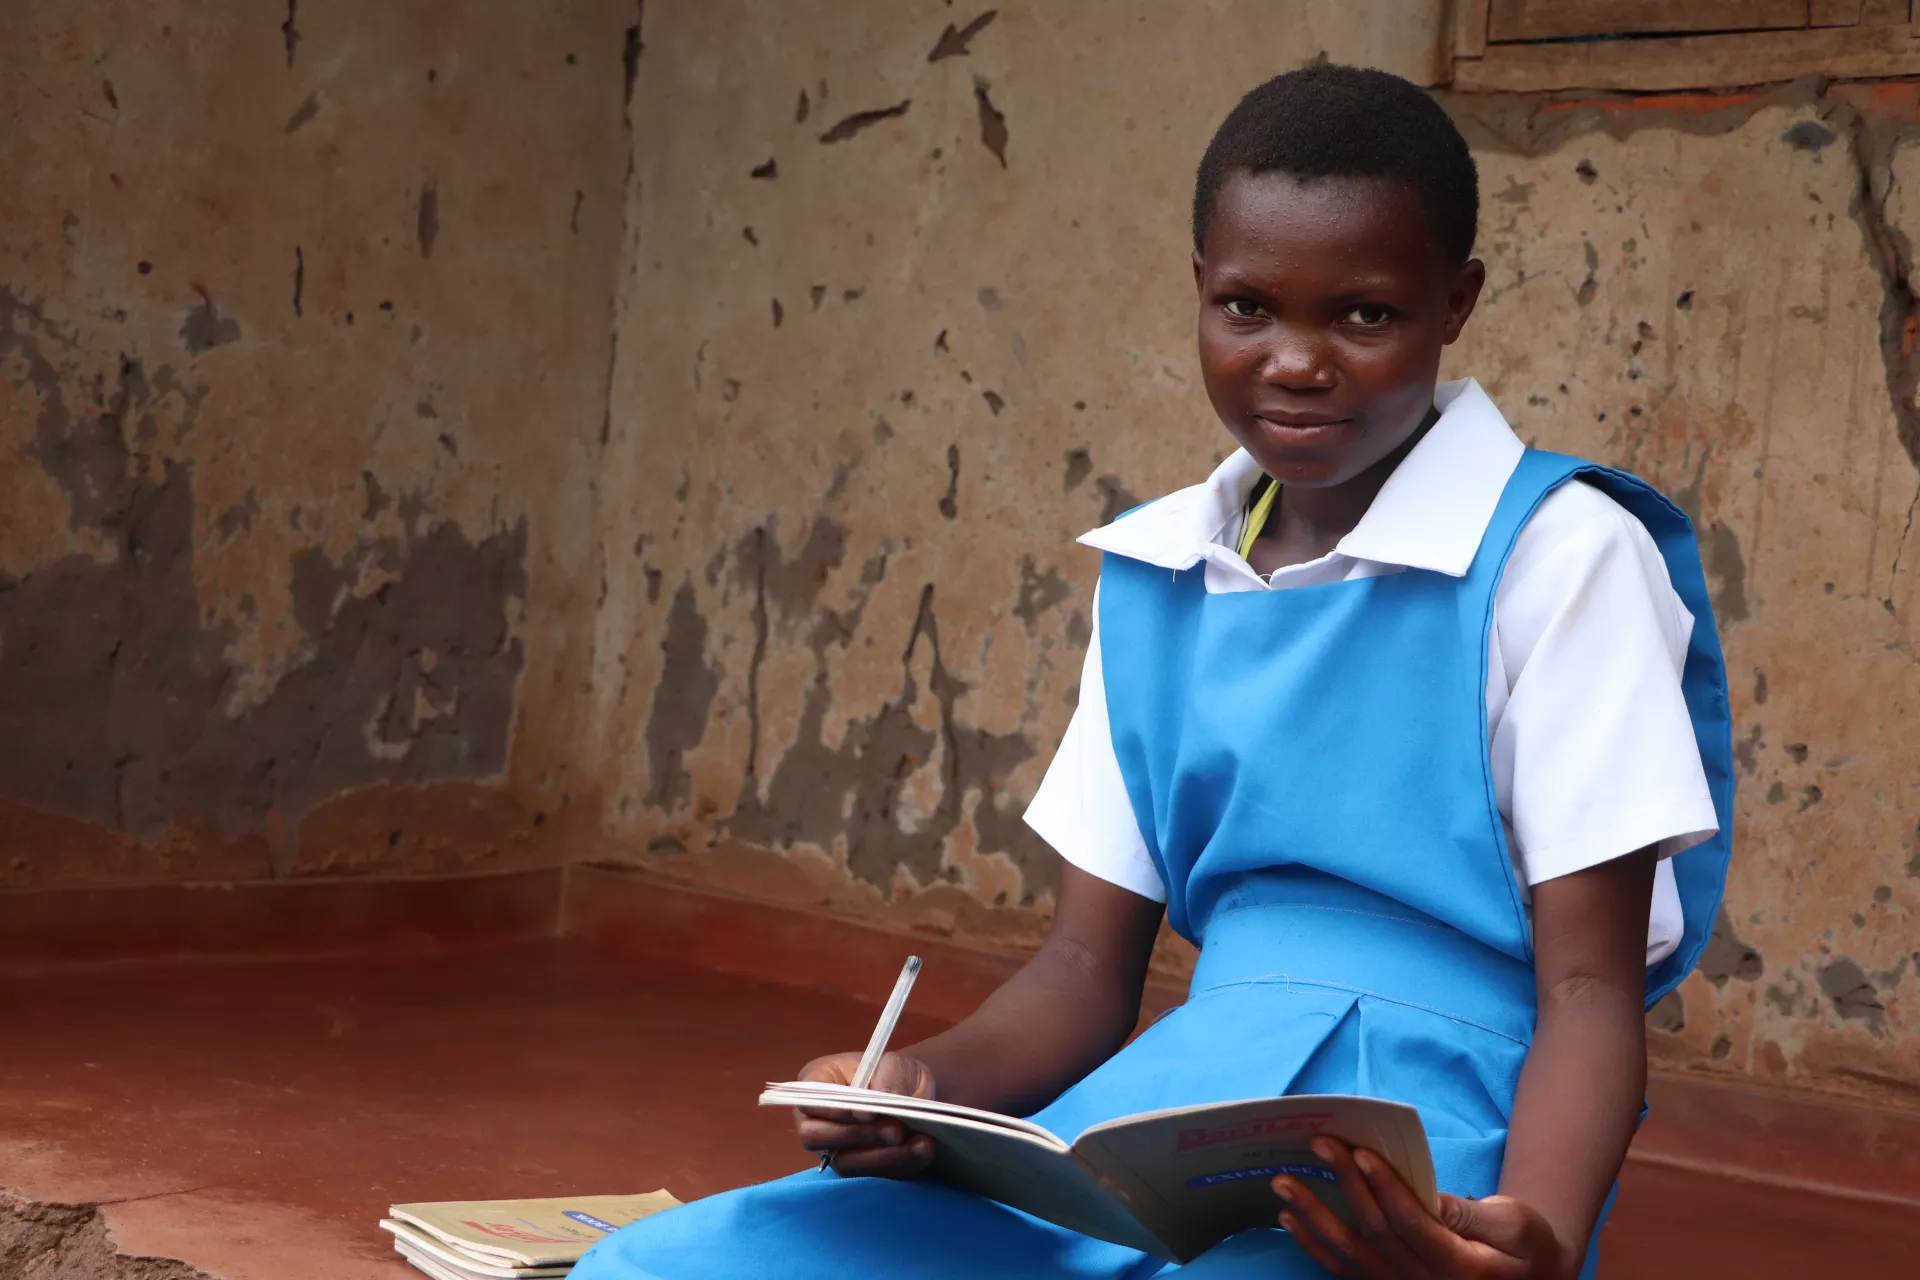 16 year old Lucy got pregnant at 14, returned to school, got pregnant again and married at 16 during COVID-19 school closures in Malawi. Lucy is now back in school in at Mlale primary school in Lilongwe, Malawi.